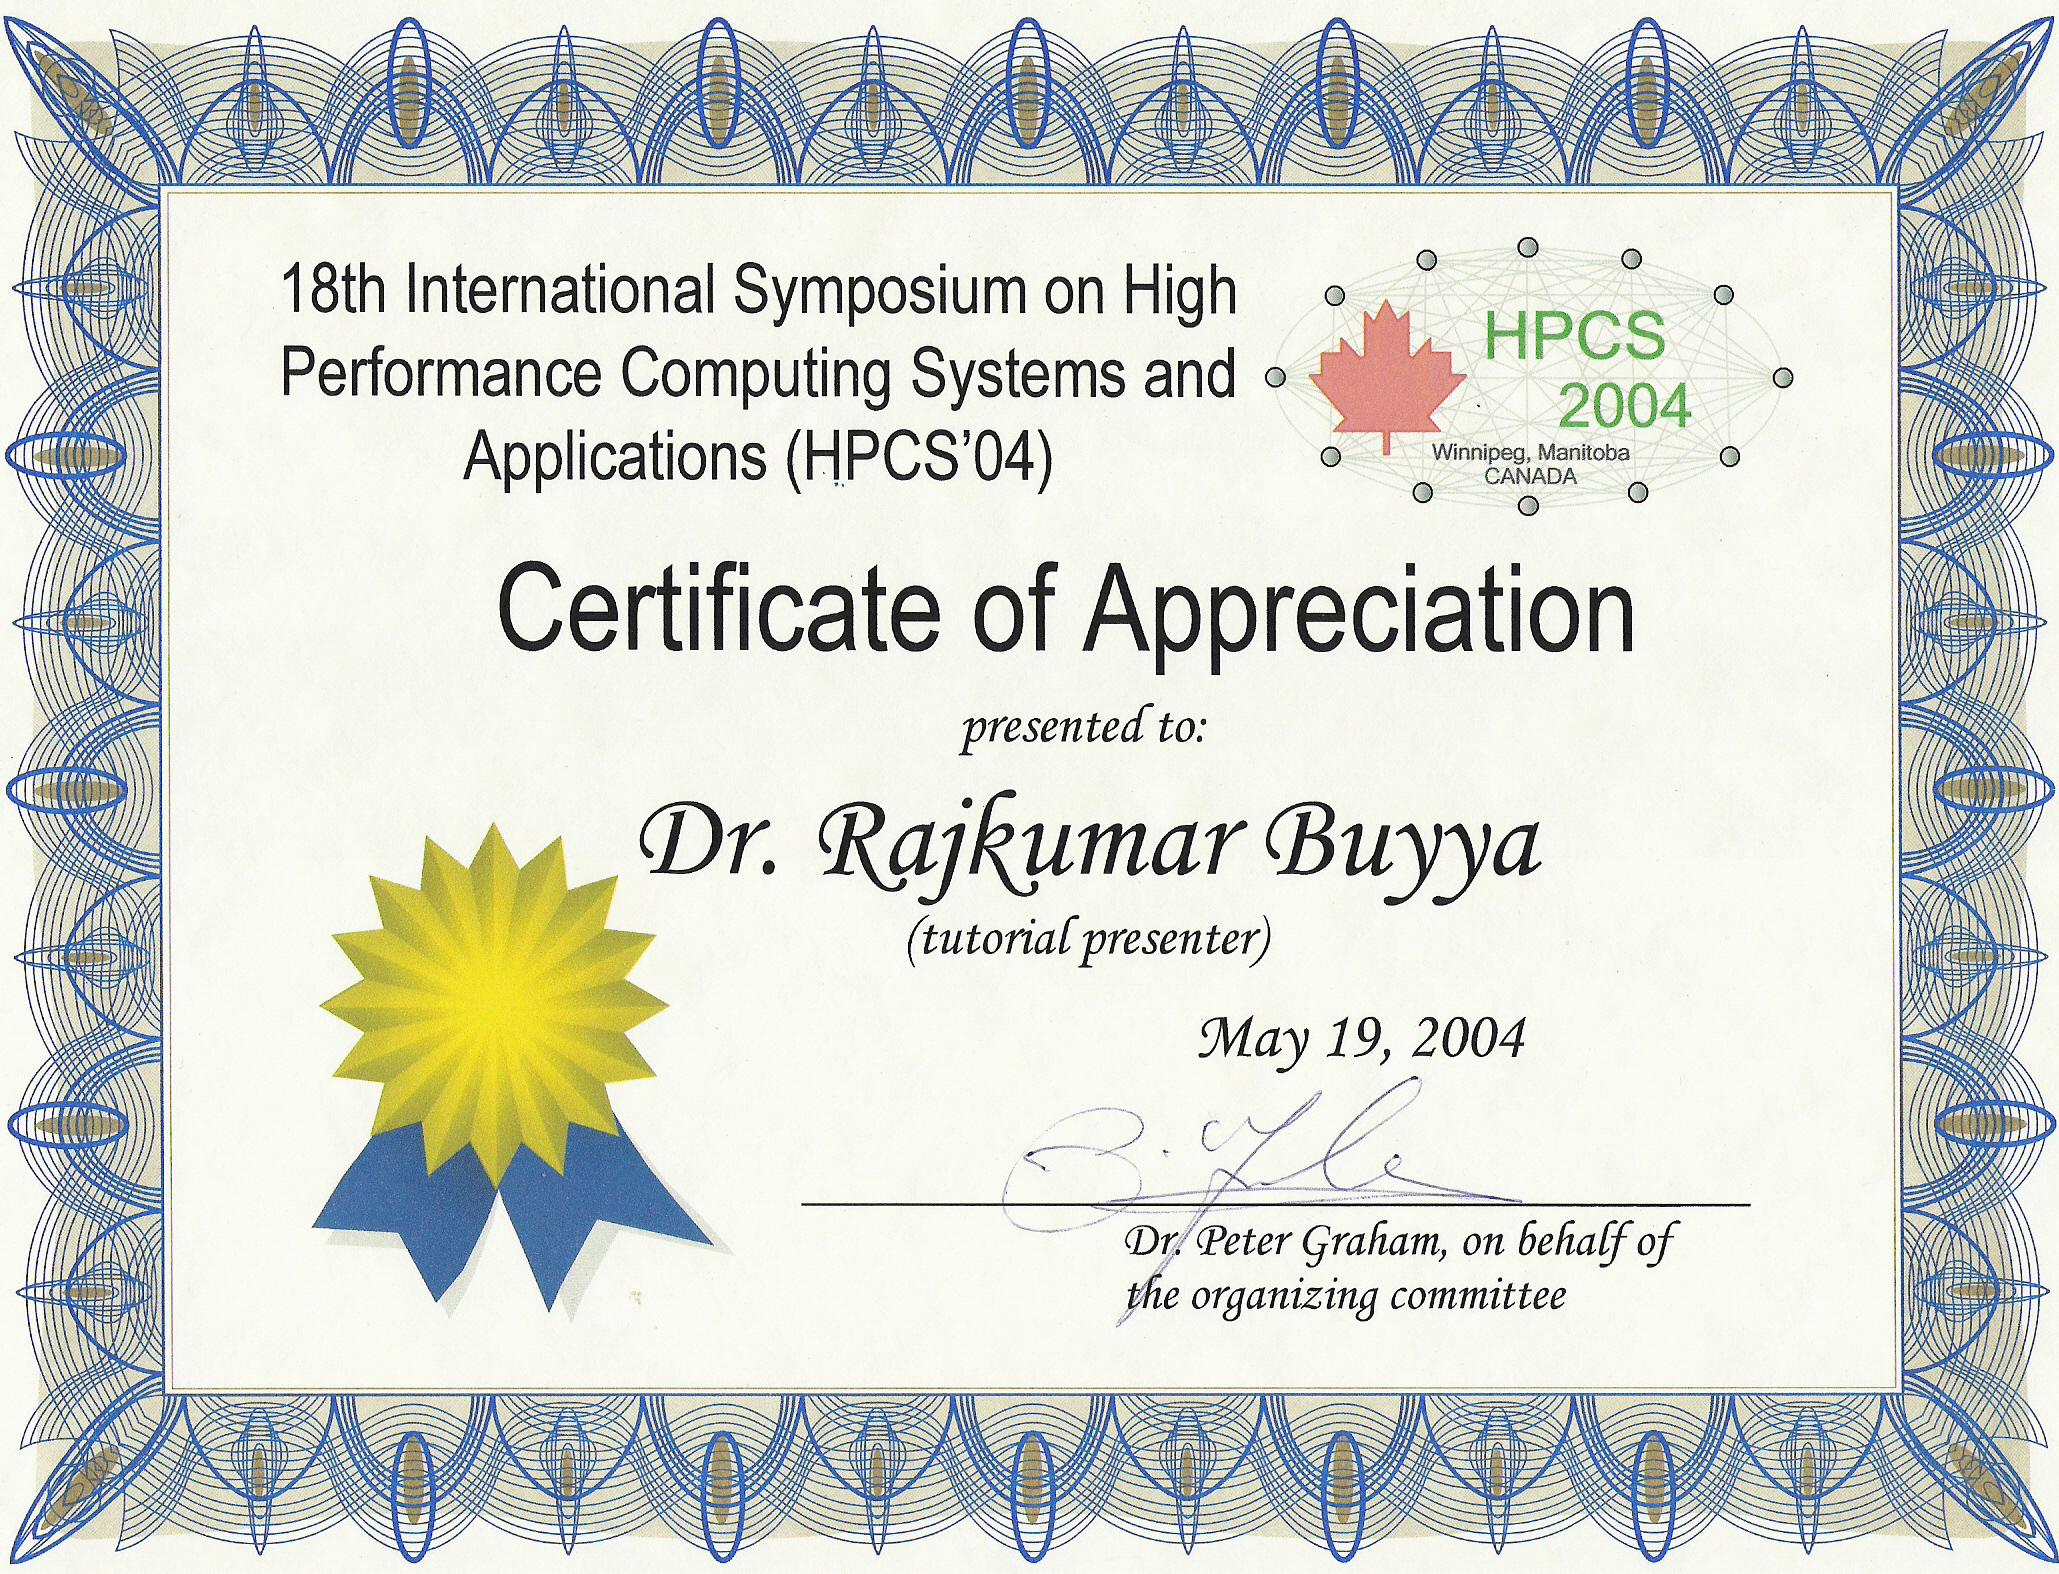 Rajkumar Buyya S Home Page - Medical Conference Certificate Throughout International Conference Certificate Templates